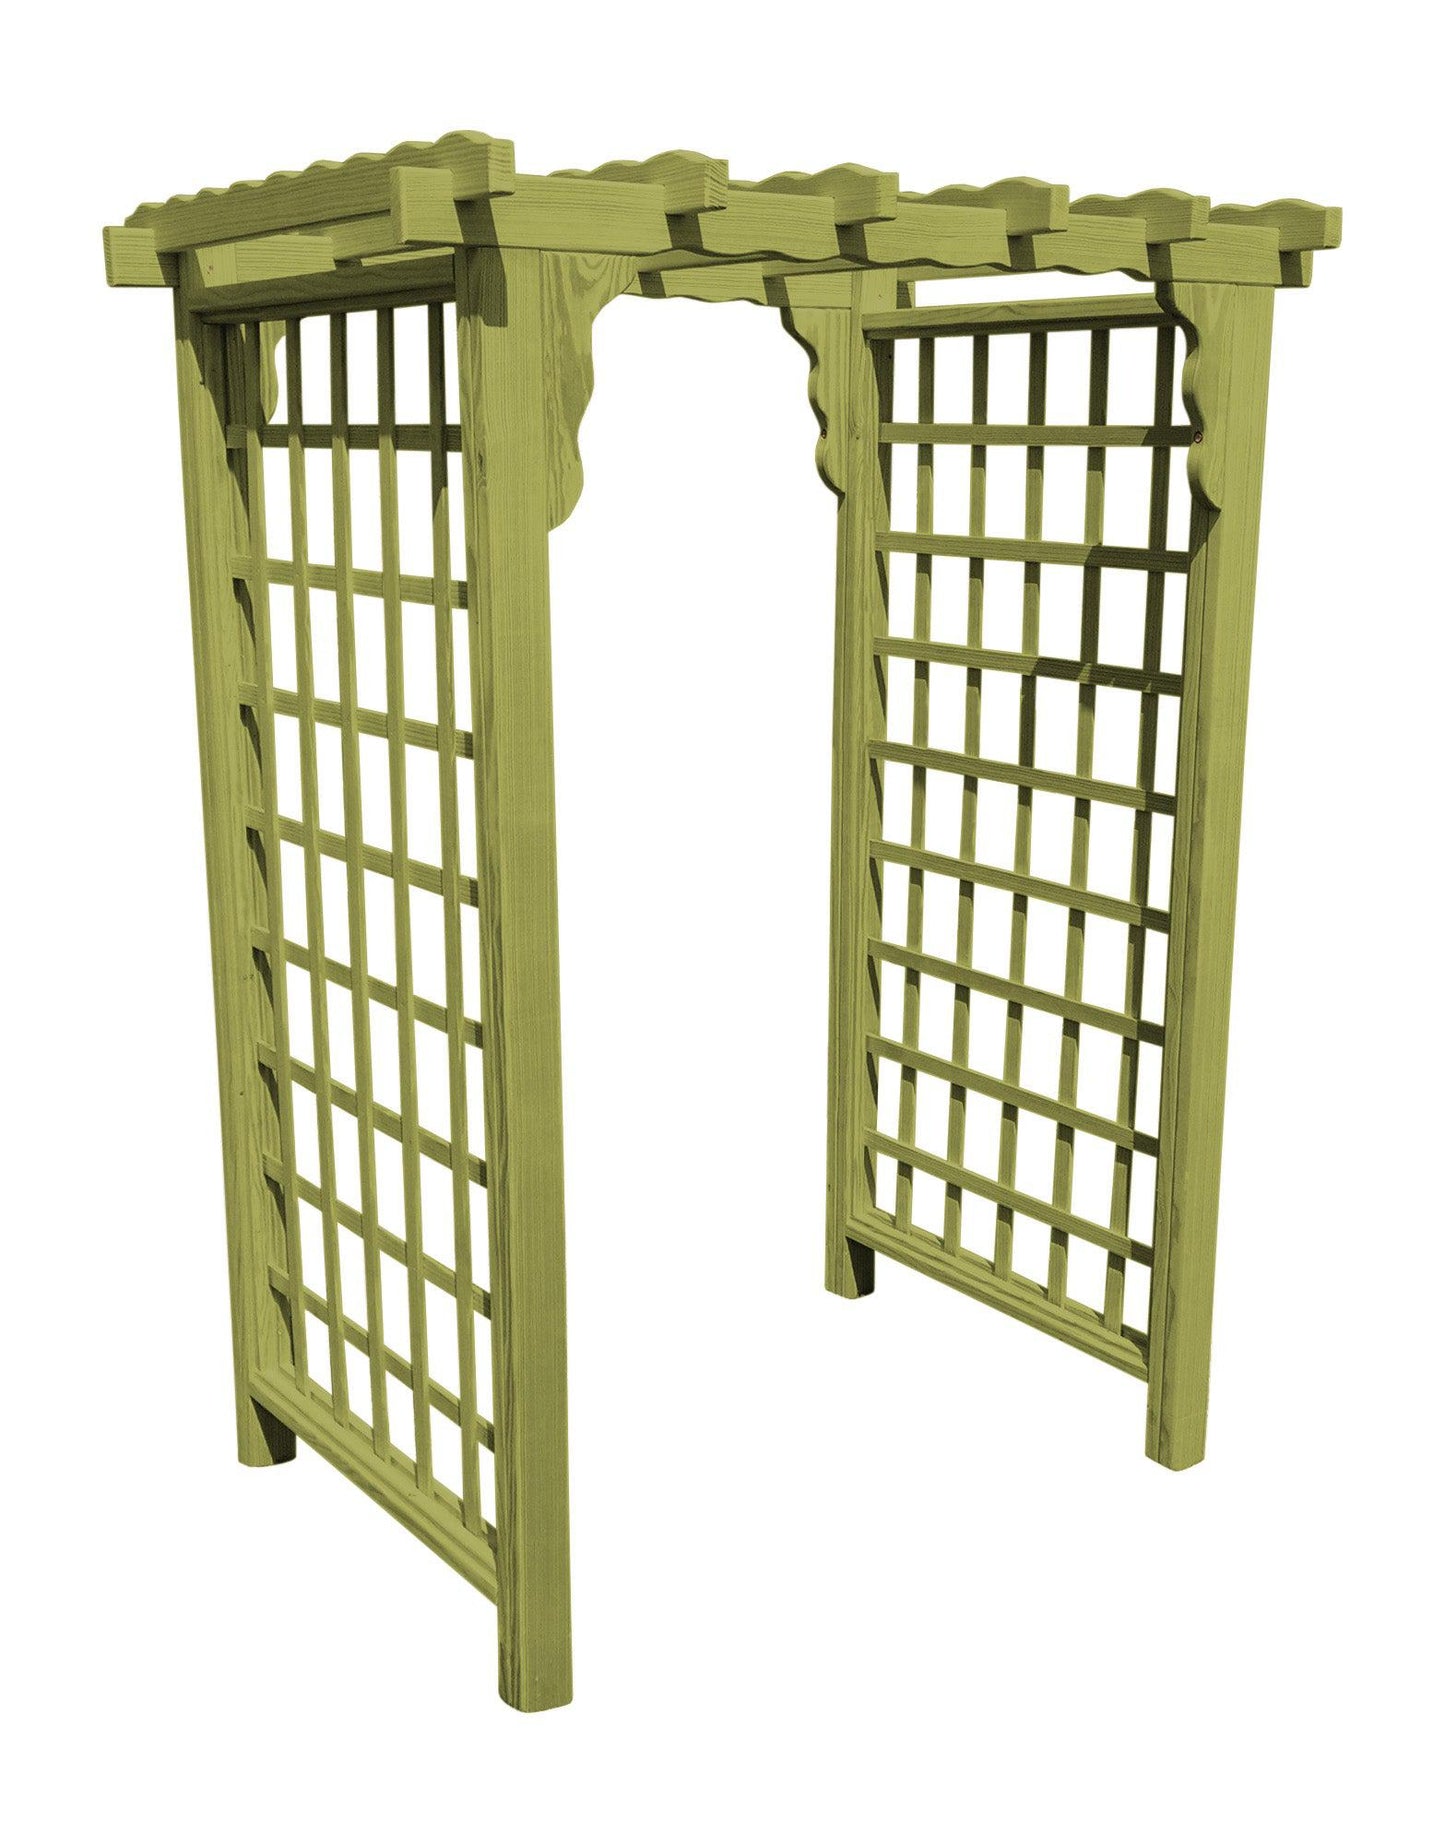 A&L FURNITURE CO. 6' Lexington Pressure Treated Pine Arbor - LEAD TIME TO SHIP 10 BUSINESS DAYS